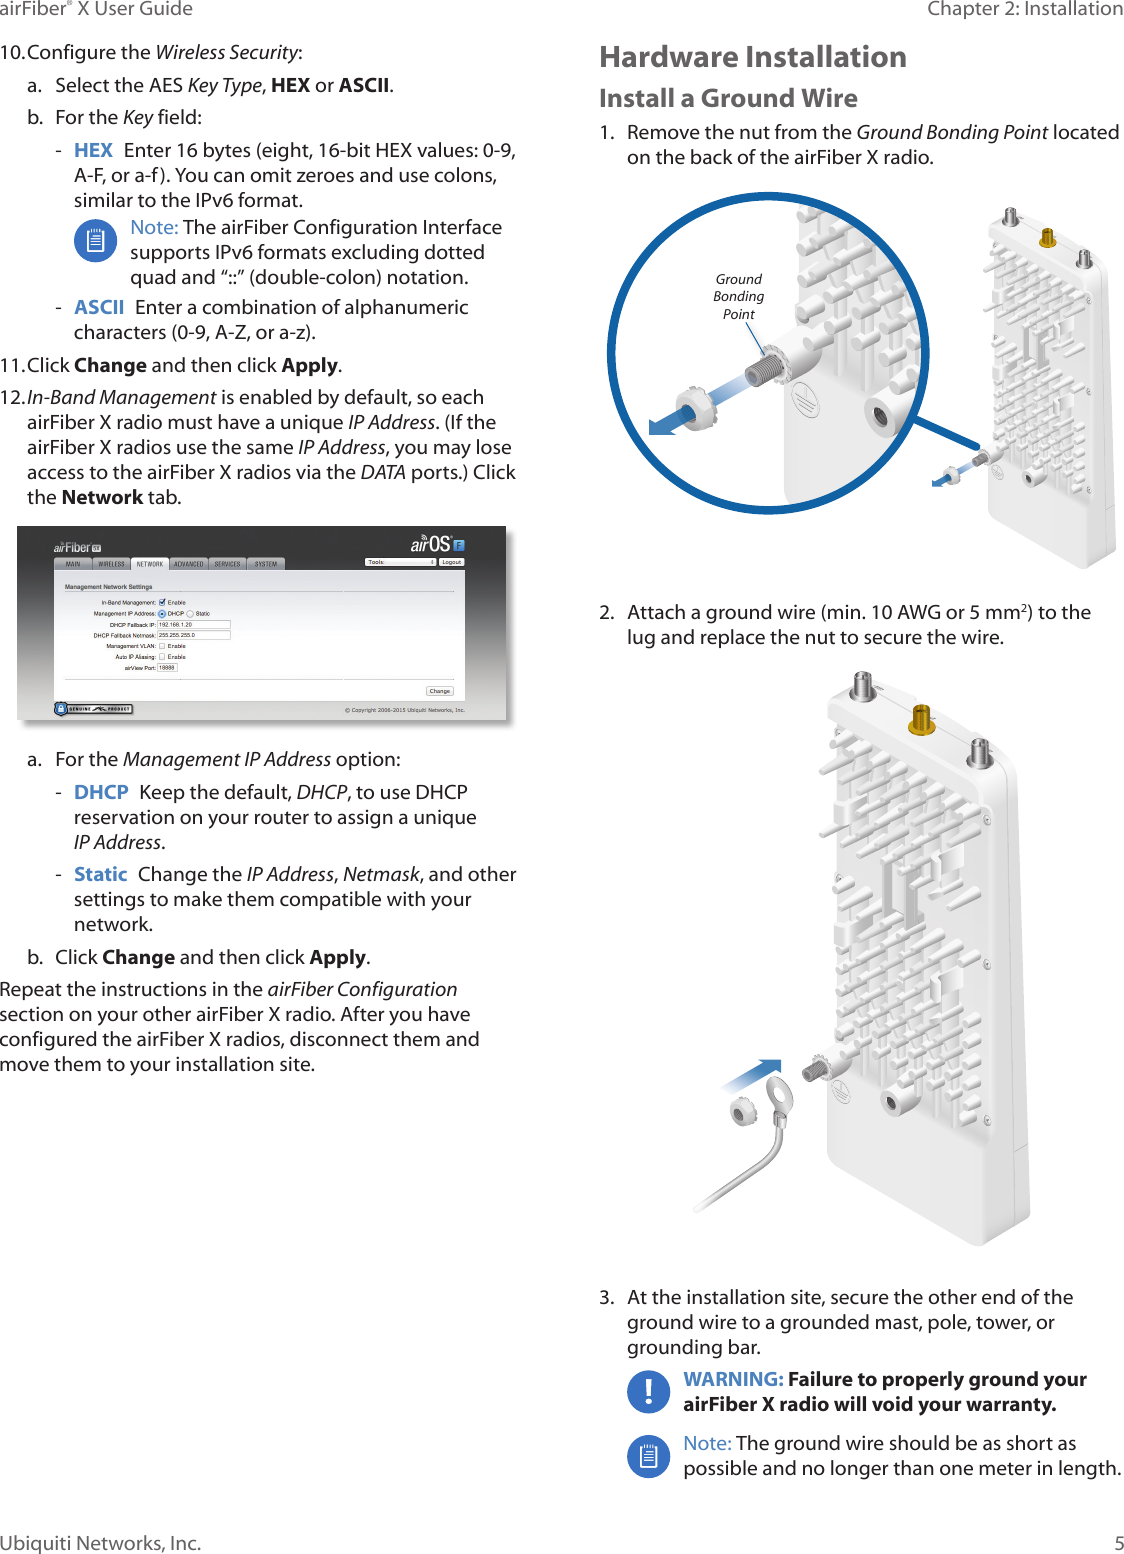 5Chapter 2: InstallationairFiber® X User GuideUbiquiti Networks, Inc.10. Configure the Wireless Security:a. Select the AES Key Type, HEX or ASCII.b.  For the Key field: -HEX  Enter 16 bytes (eight, 16-bit HEX values: 0-9,A-F, or a-f). You can omit zeroes and use colons, similar to the IPv6 format.Note: The airFiber Configuration Interface supports IPv6 formats excluding dotted quad and “::” (double-colon) notation.  -ASCII  Enter a combination of alphanumeric characters (0-9, A-Z, or a-z).11. Click Change and then click Apply.12. In-Band Management is enabled by default, so eachairFiberX radio must have a unique IP Address. (If theairFiberX radios use the same IP Address, you may loseaccess to the airFiberX radios via the DATA ports.) Clickthe Network tab.a. For the Management IP Address option: -DHCP  Keep the default, DHCP, to use DHCPreservation on your router to assign a unique IPAddress. -Static  Change the IP Address, Netmask, and other settings to make them compatible with your network.b.  Click Change and then click Apply.Repeat the instructions in the airFiber Configuration section on your other airFiberX radio. After you have configured the airFiberX radios, disconnect them and move them to your installation site.Hardware InstallationInstall a Ground Wire1. Remove the nut from the Ground Bonding Point locatedon the back of the airFiberX radio.Ground Bonding Point2. Attach a ground wire (min. 10 AWG or 5 mm2) to thelug and replace the nut to secure the wire.3. At the installation site, secure the other end of theground wire to a grounded mast, pole, tower, orgrounding bar.WARNING: Failure to properly ground your airFiberX radio will void your warranty. Note: The ground wire should be as short as possible and no longer than one meter in length. 